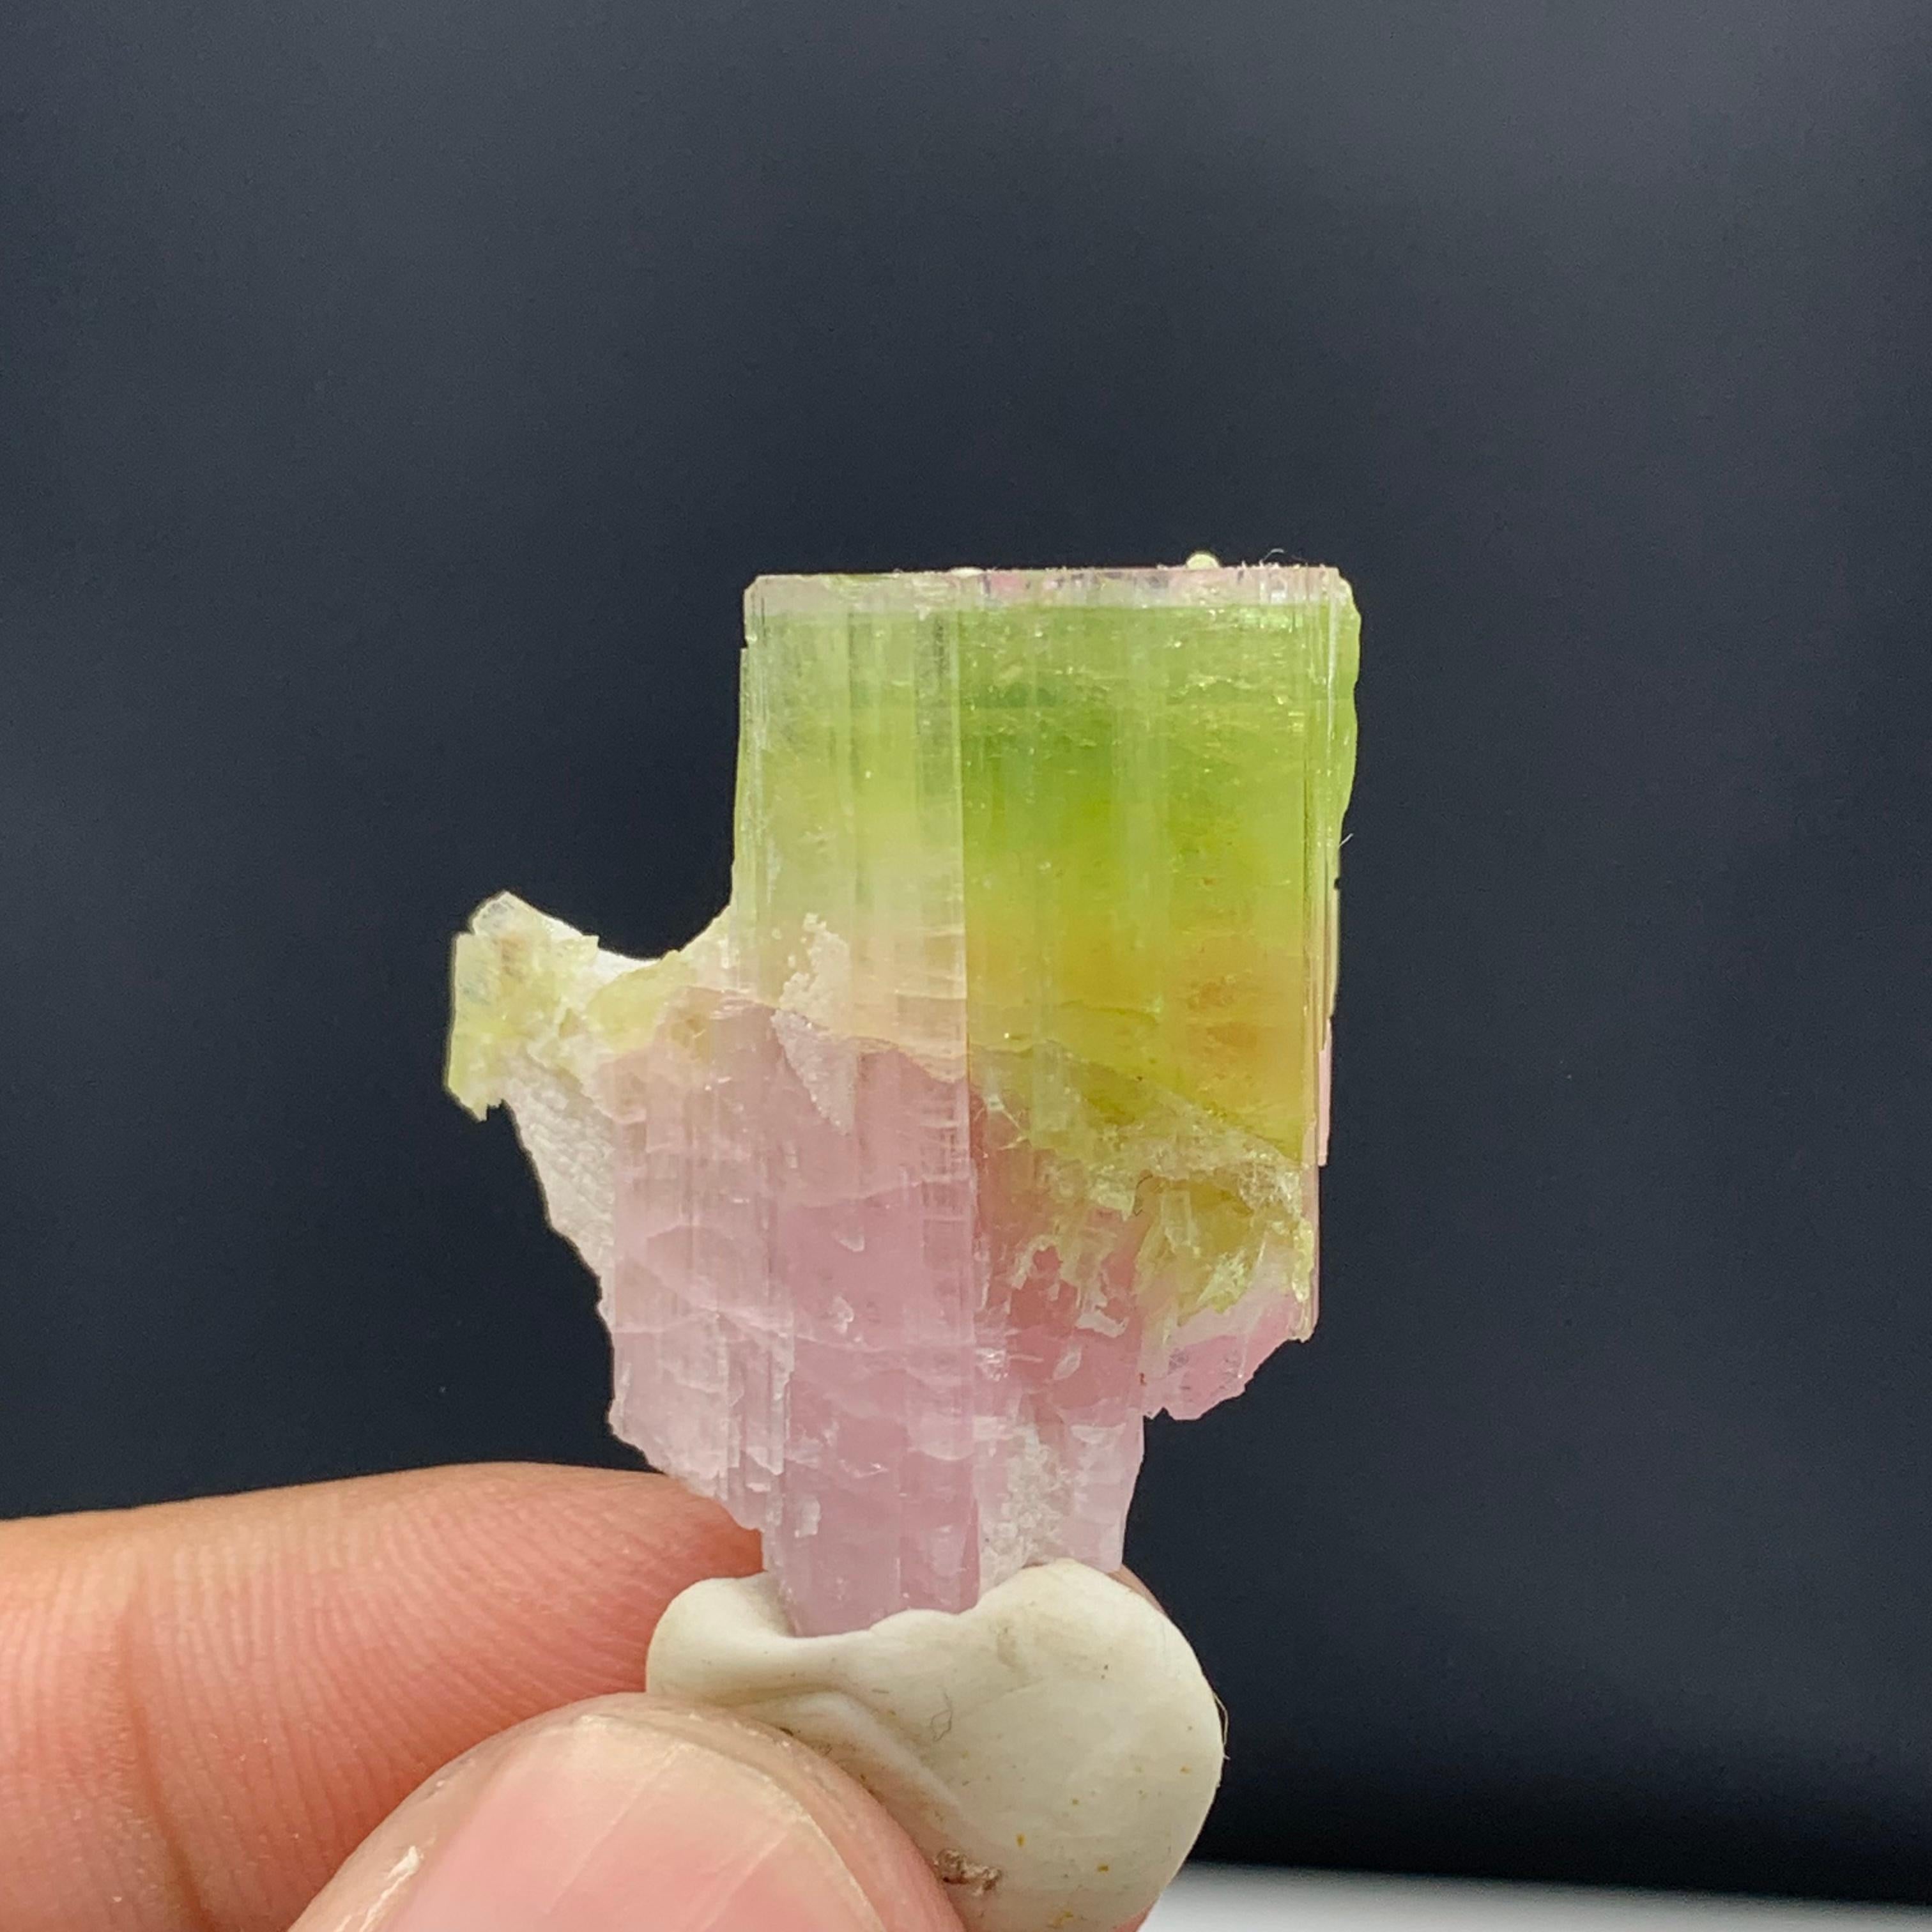 42.65 Carat Gorgeous Bi Color Tourmaline Specimen From Afghanistan 
Weight: 42.65 Carat 
Dimension: 2.7 x2.2 x 1.5 cm
Origin: Afghanistan 

Tourmaline is a crystalline silicate mineral group in which boron is compounded with elements such as